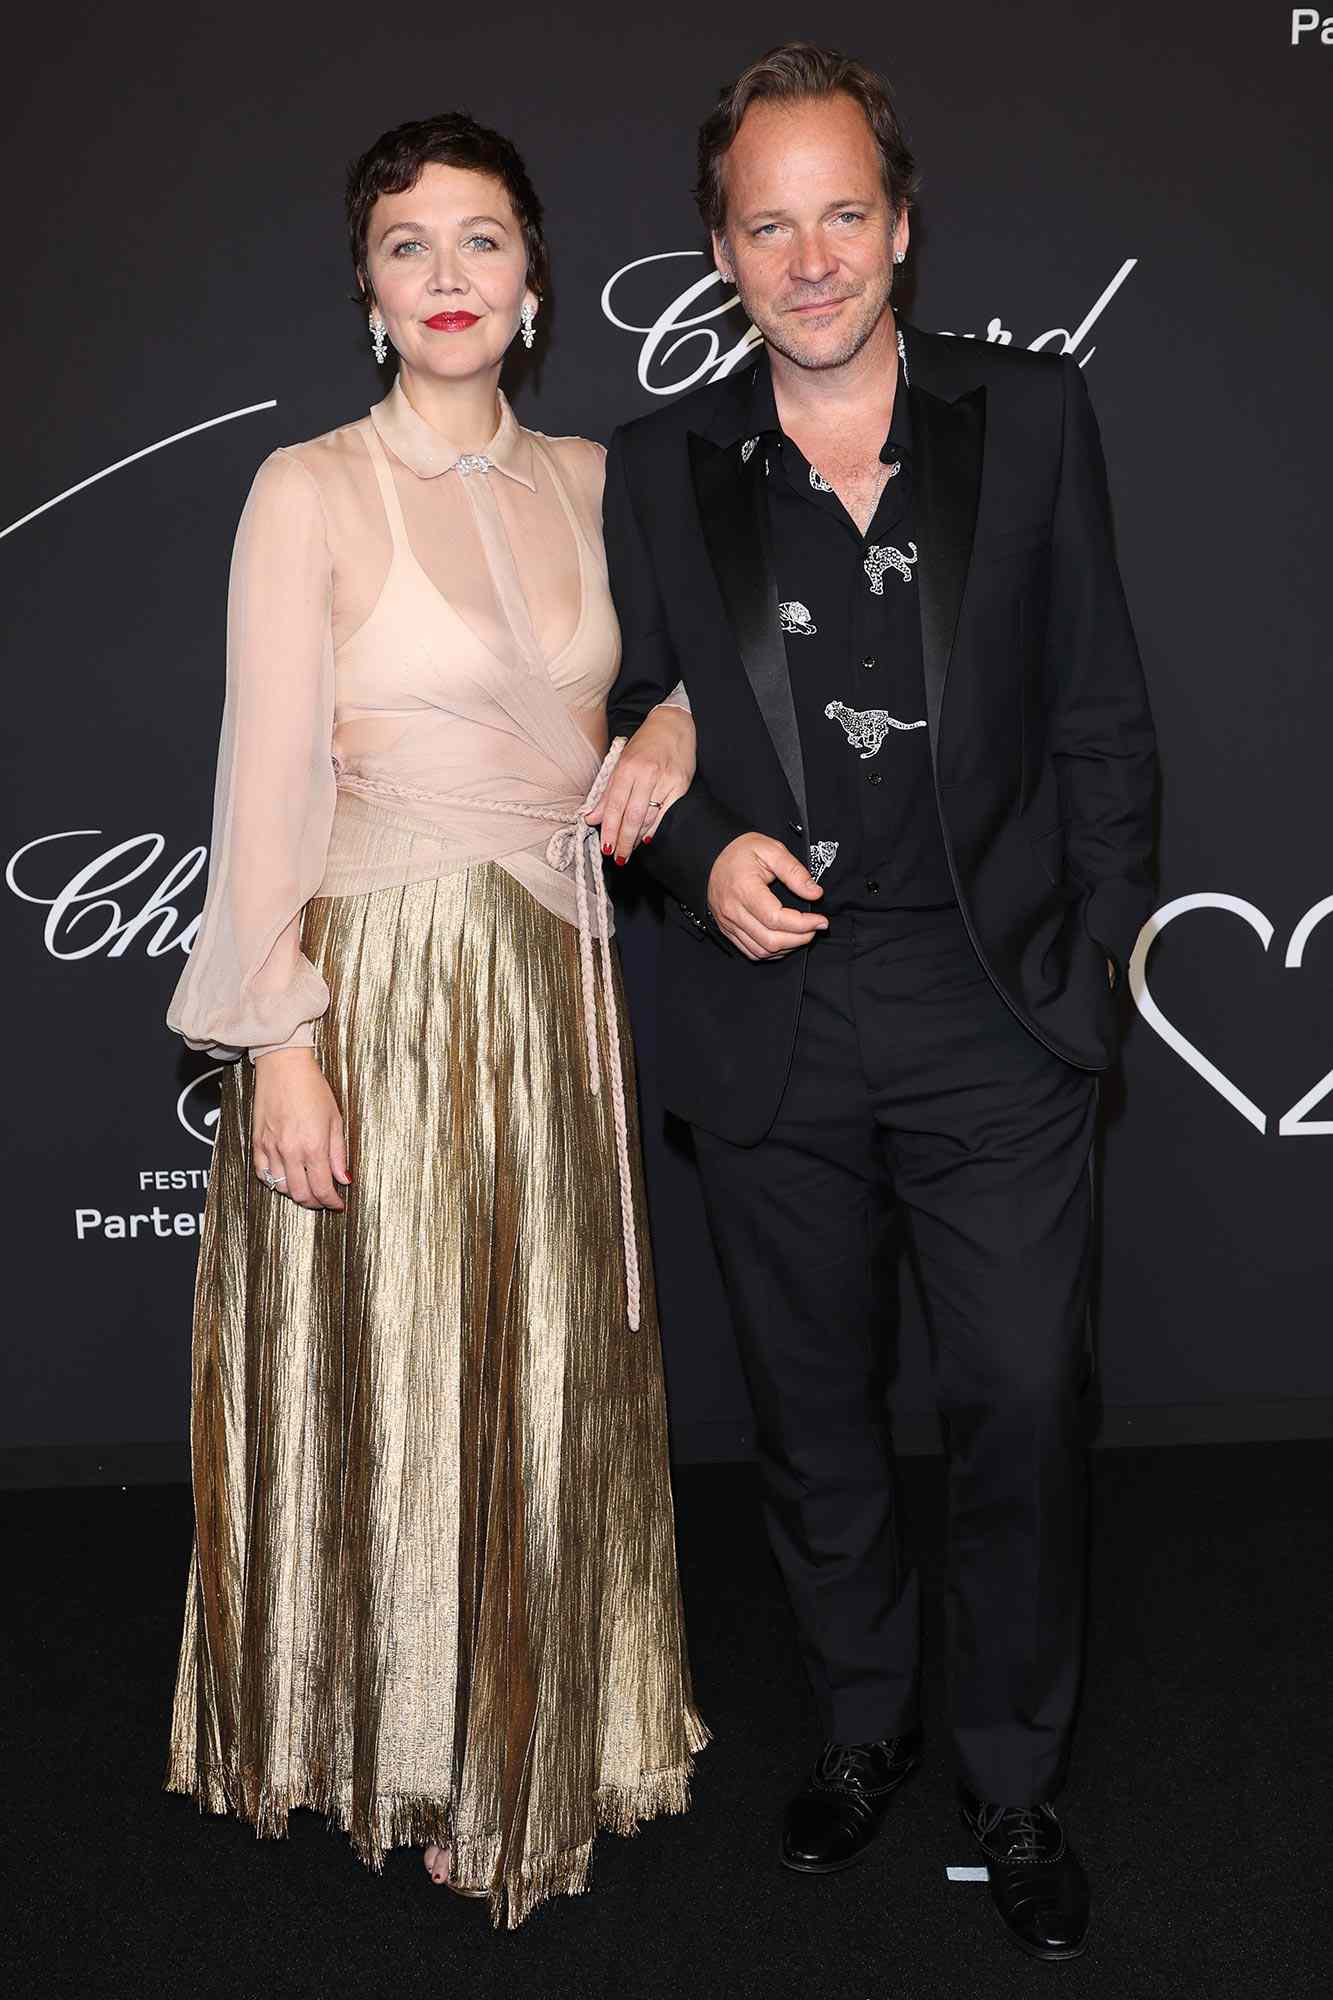 Maggie Gyllenhaal and Peter Sarsgaard attend "Chopard Loves Cinema" Gala Dinner at Hotel Martinez on May 25, 2022 in Cannes, France.